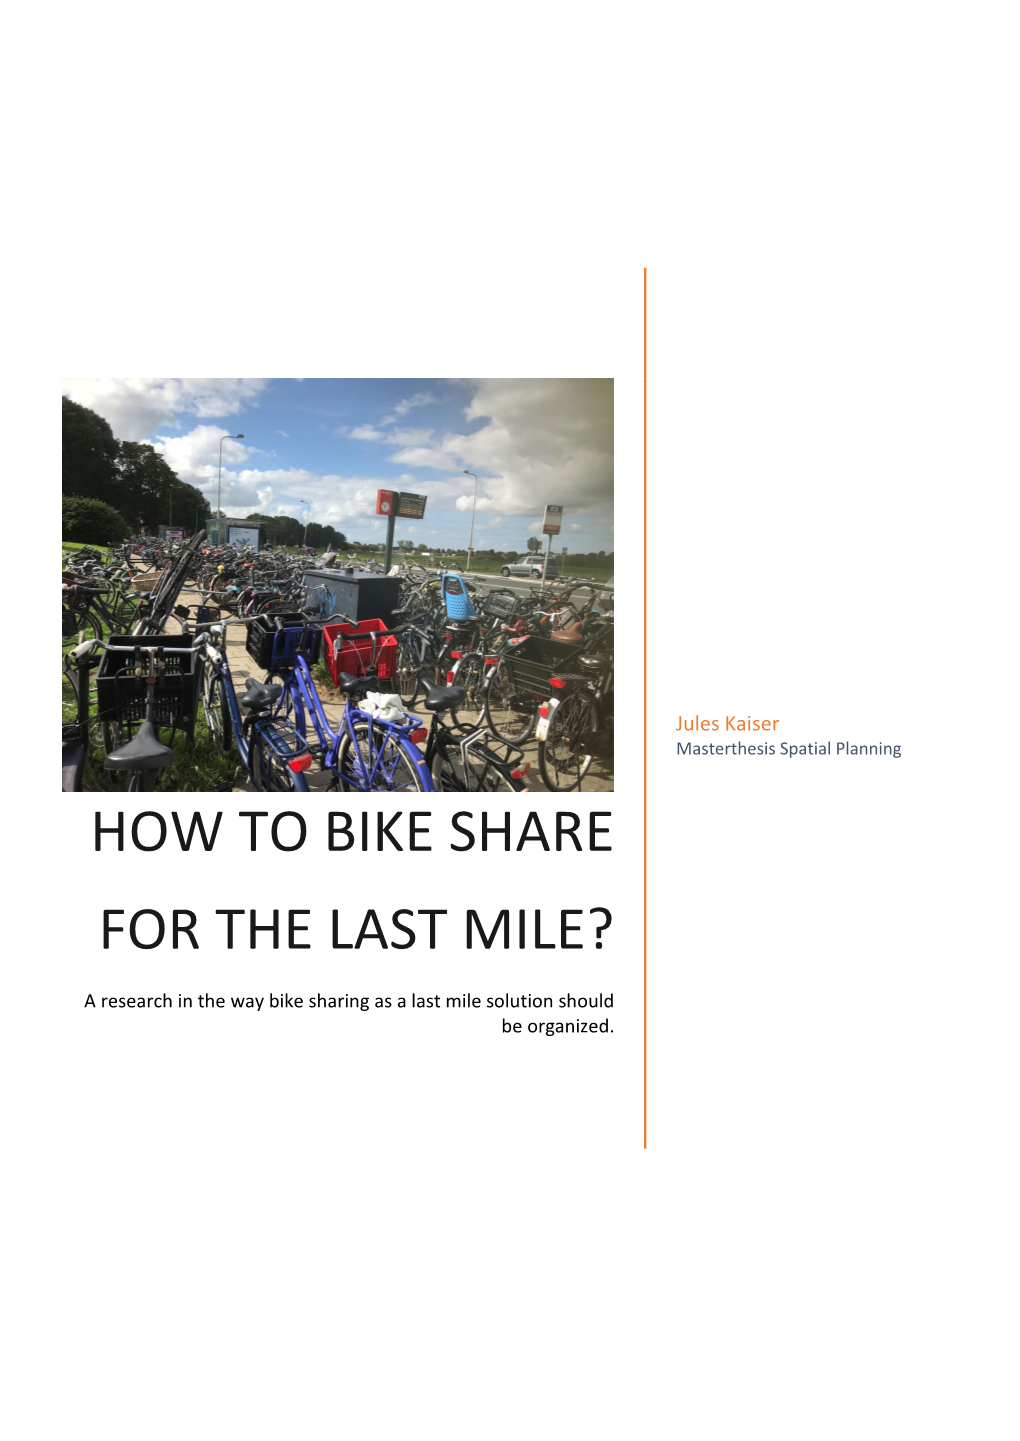 How to Bike Share for the Last Mile?